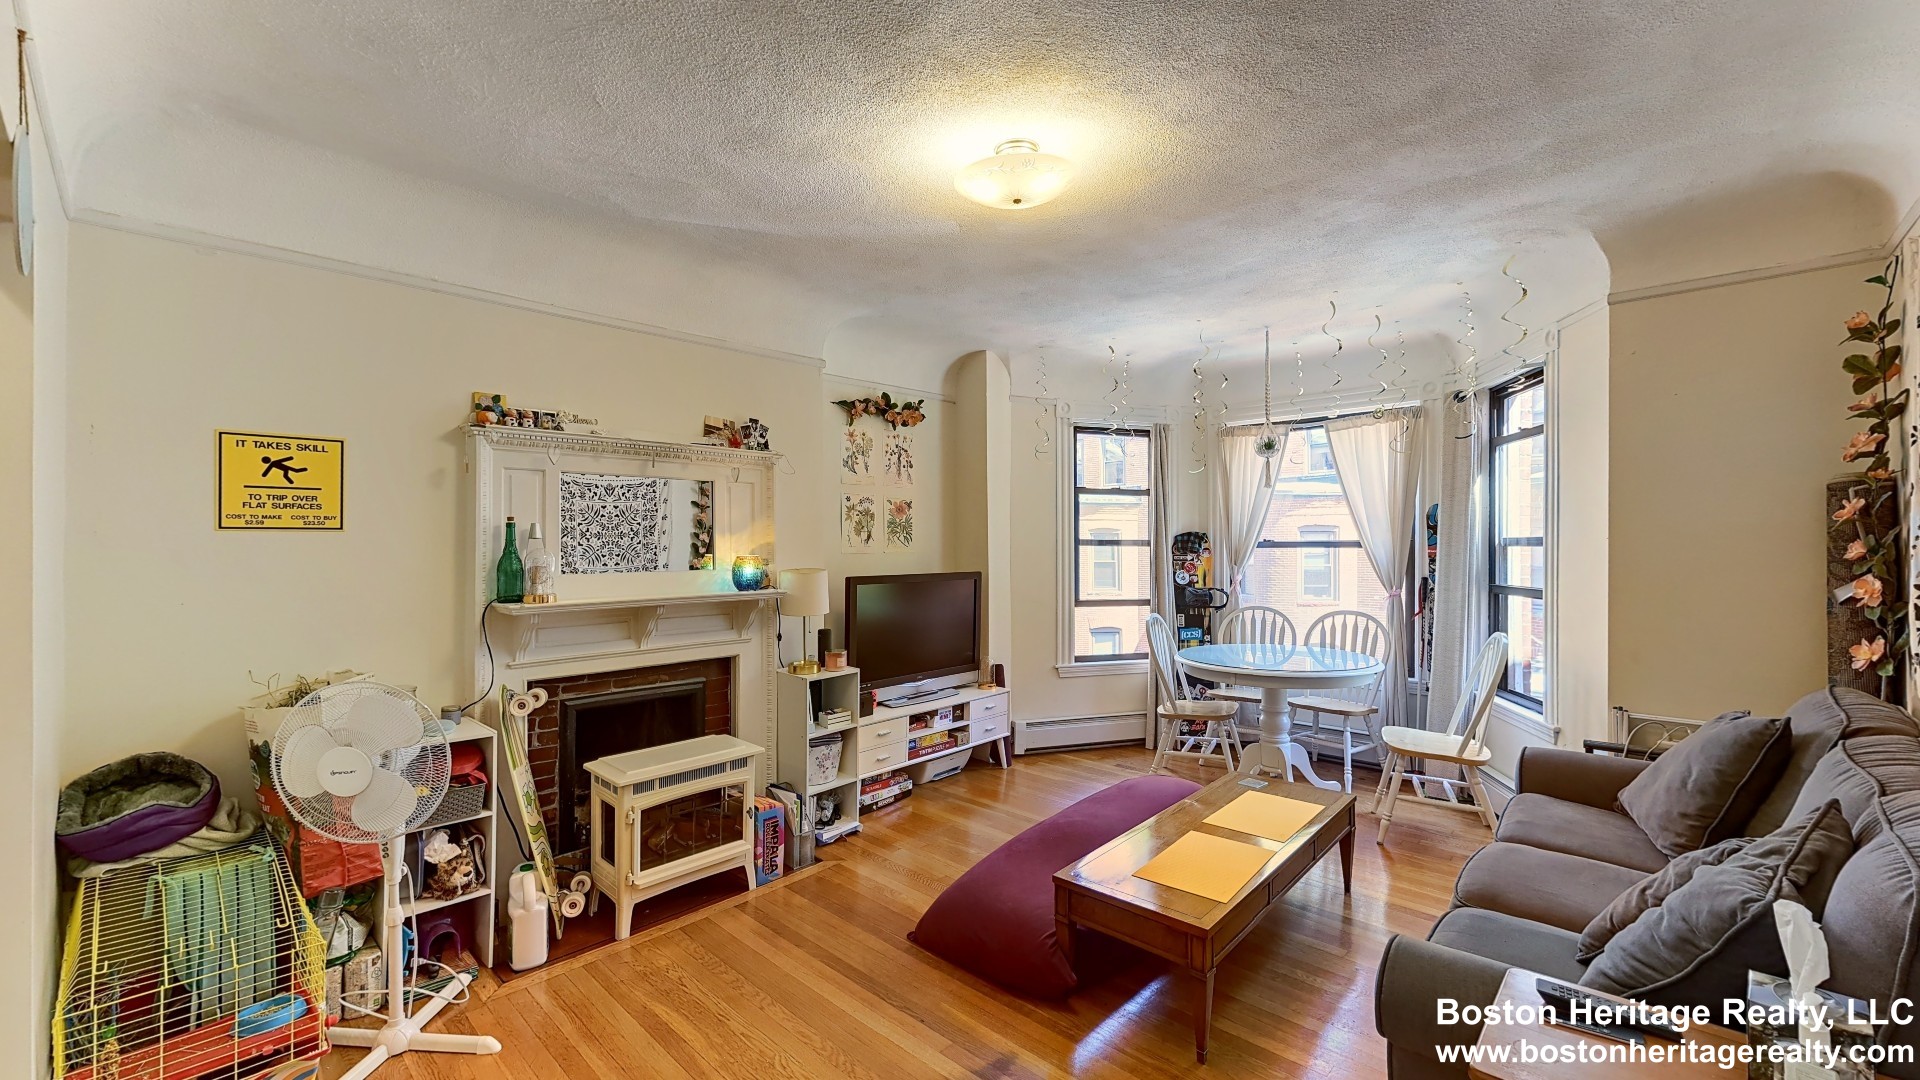 2 Beds, 1 Bath apartment in Boston, Back Bay for $3,500